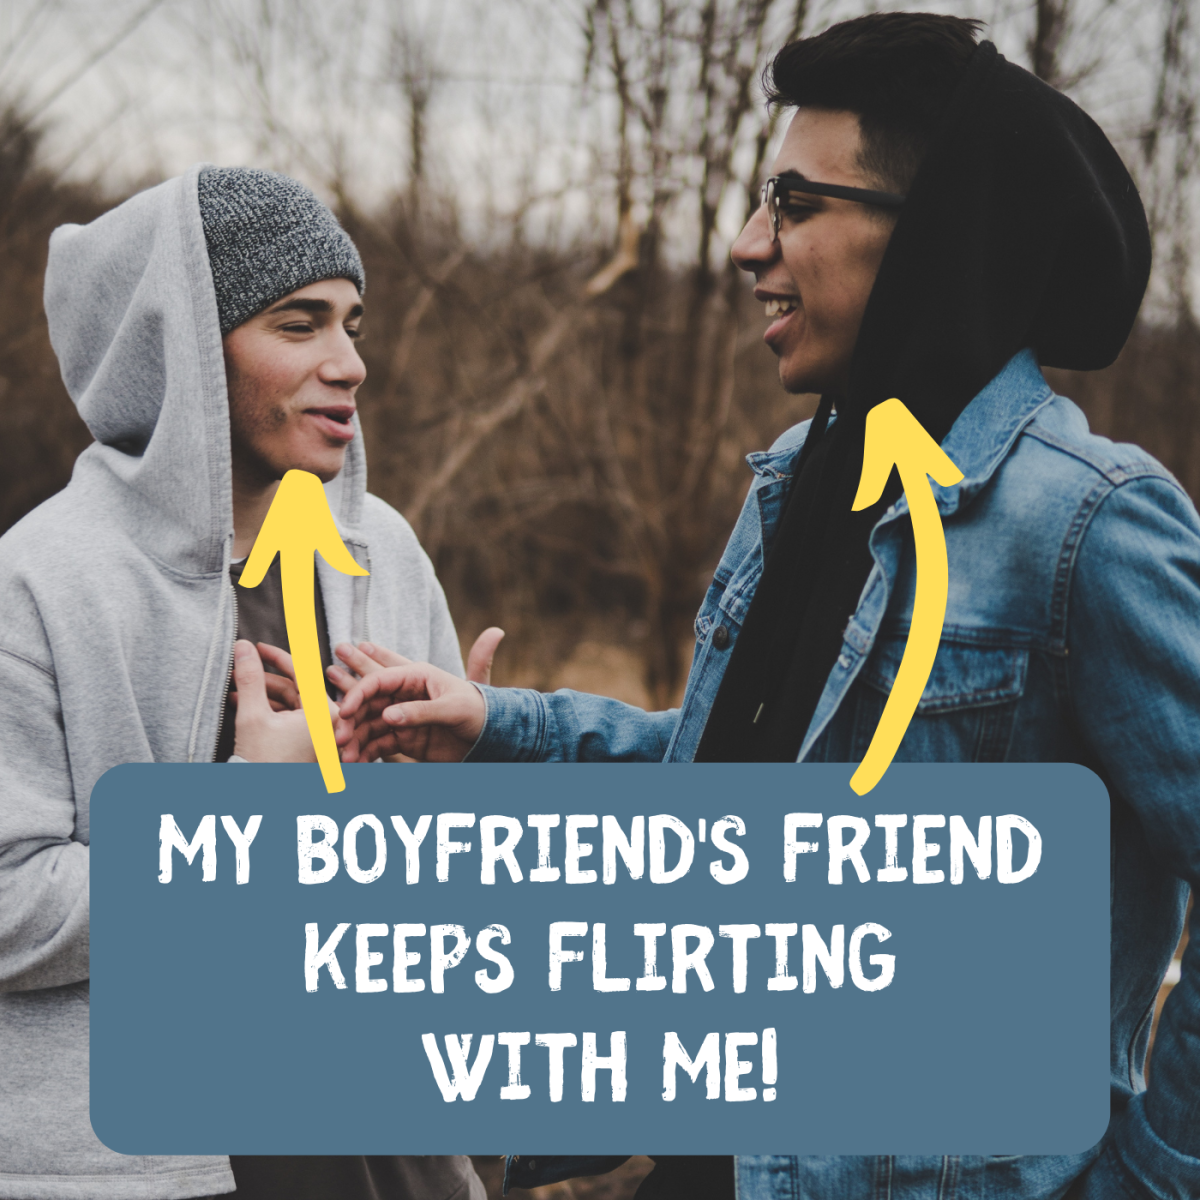 Does your BF's buddy seem to have a crush on you? Find out how to deal!